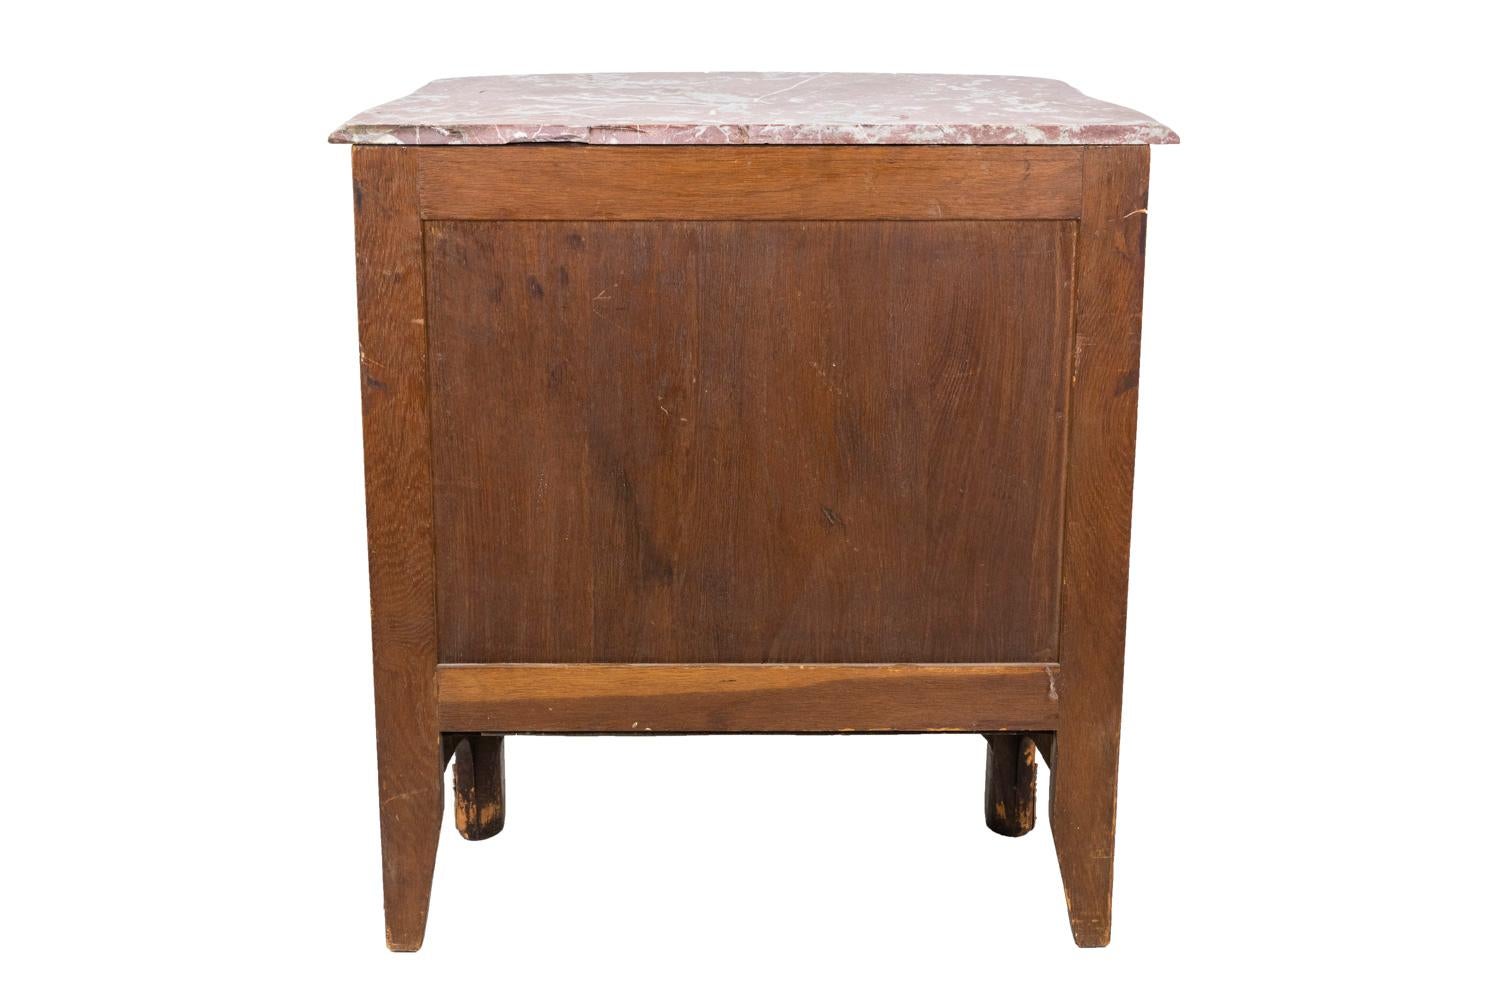 Gilt Regence Style Commode in Violetwood, circa 1880